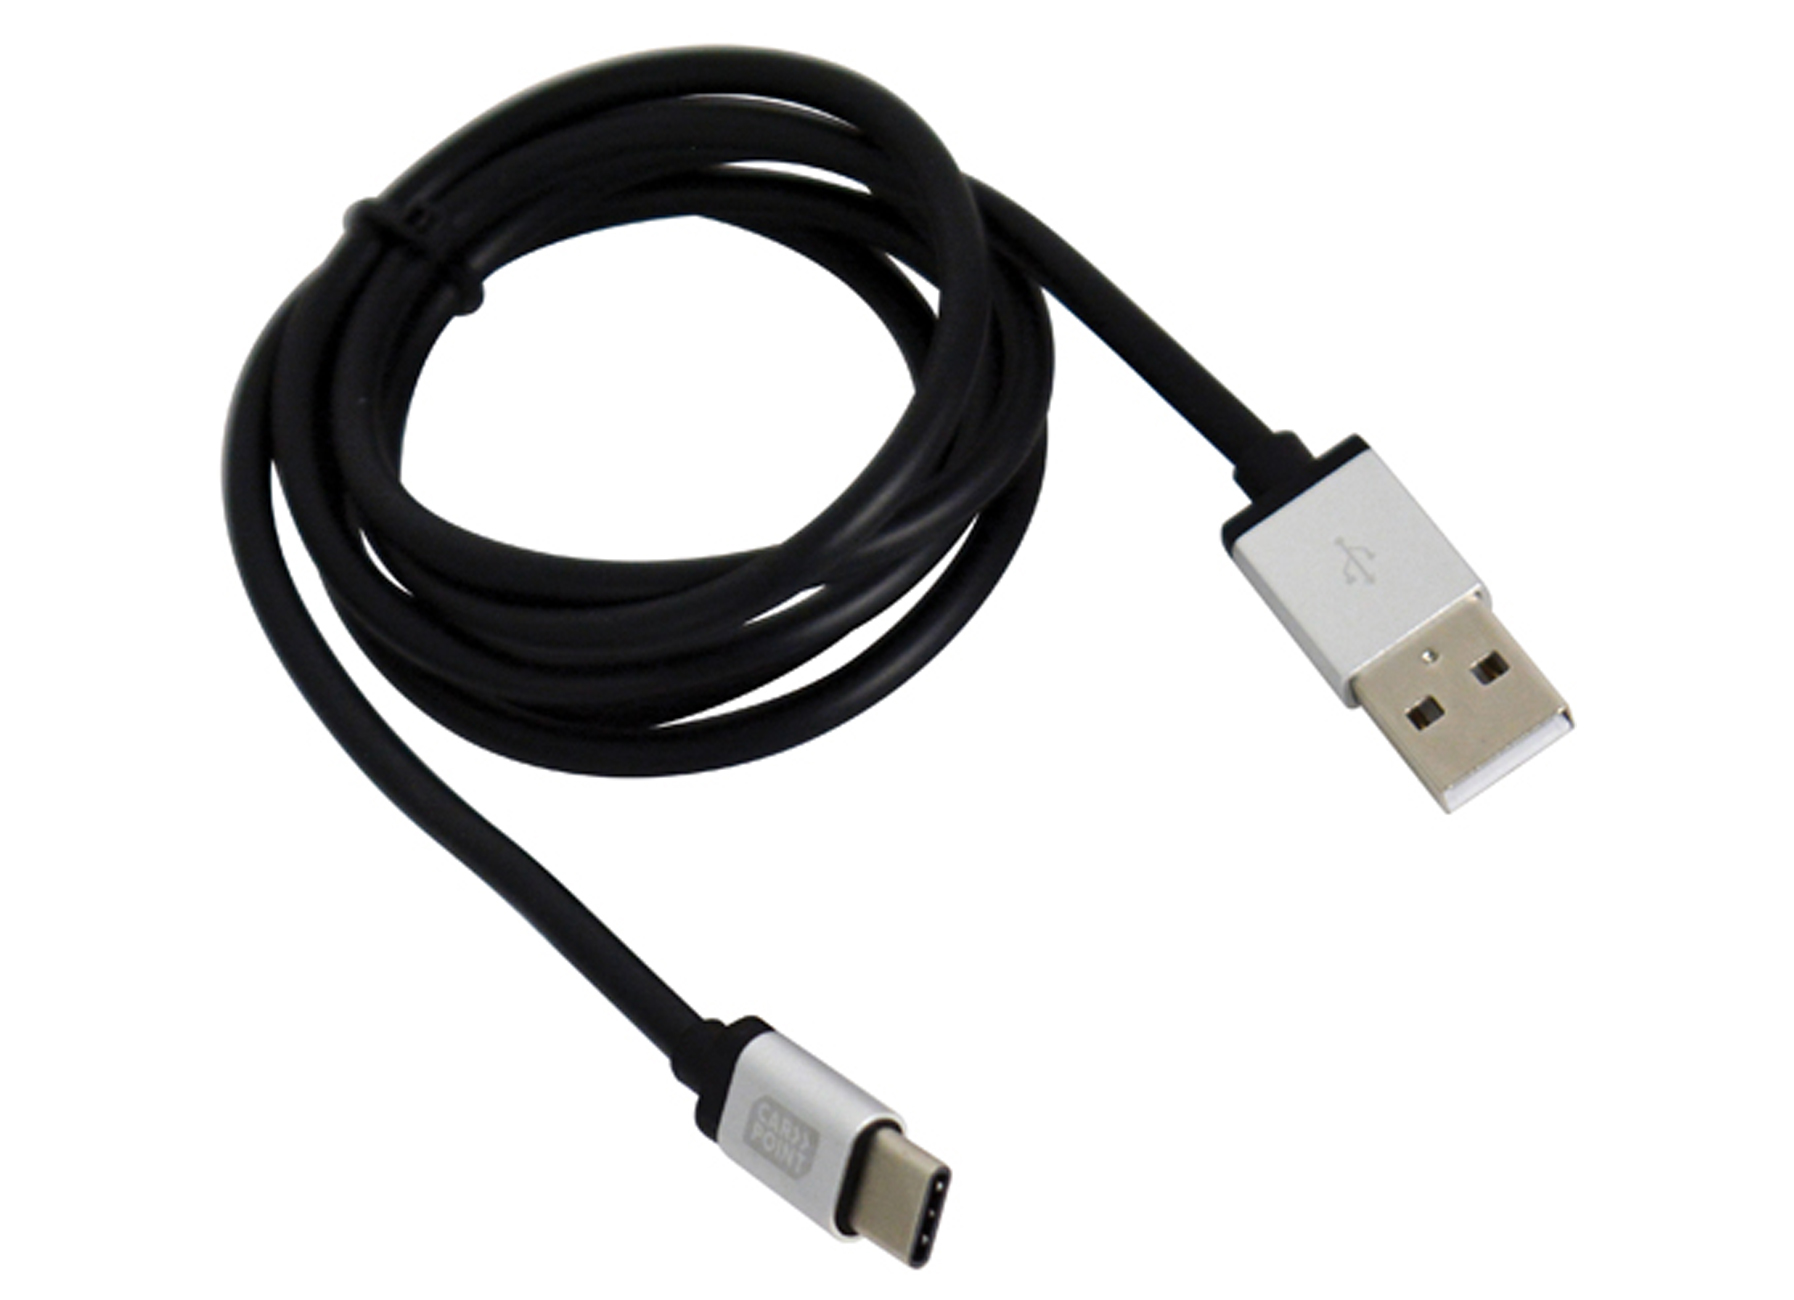 CABLE A CHARGER ET SYNCHRONISER USB 2.0 VERS TYPE C 1M